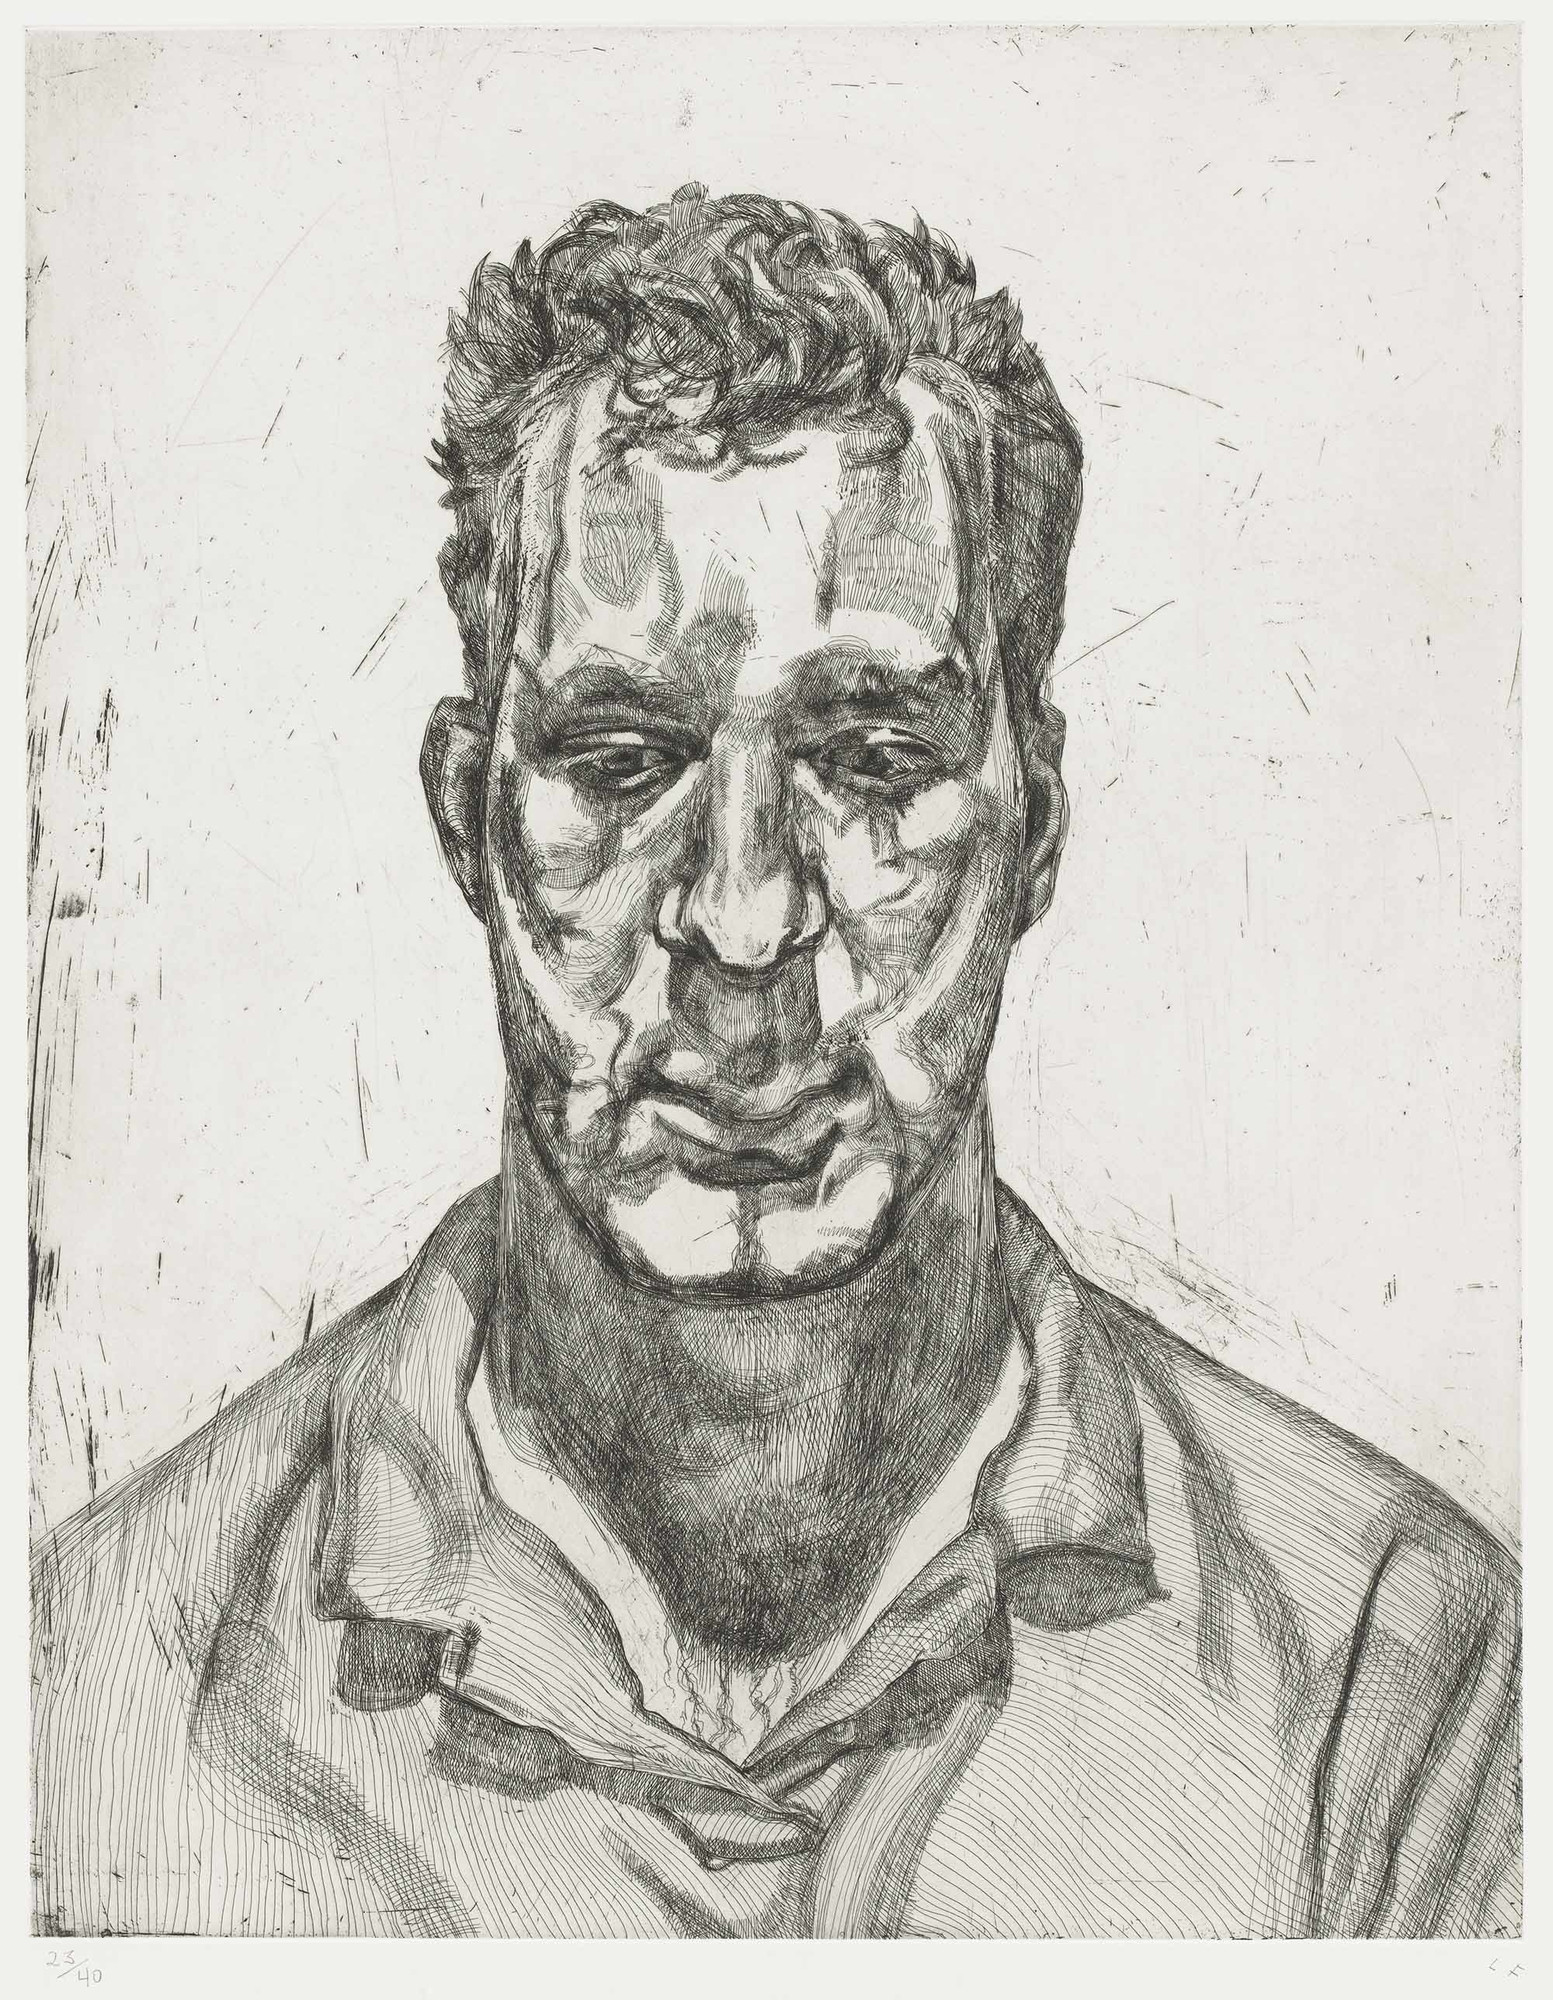 Lucian Freud: The Painter's Etchings | MoMA